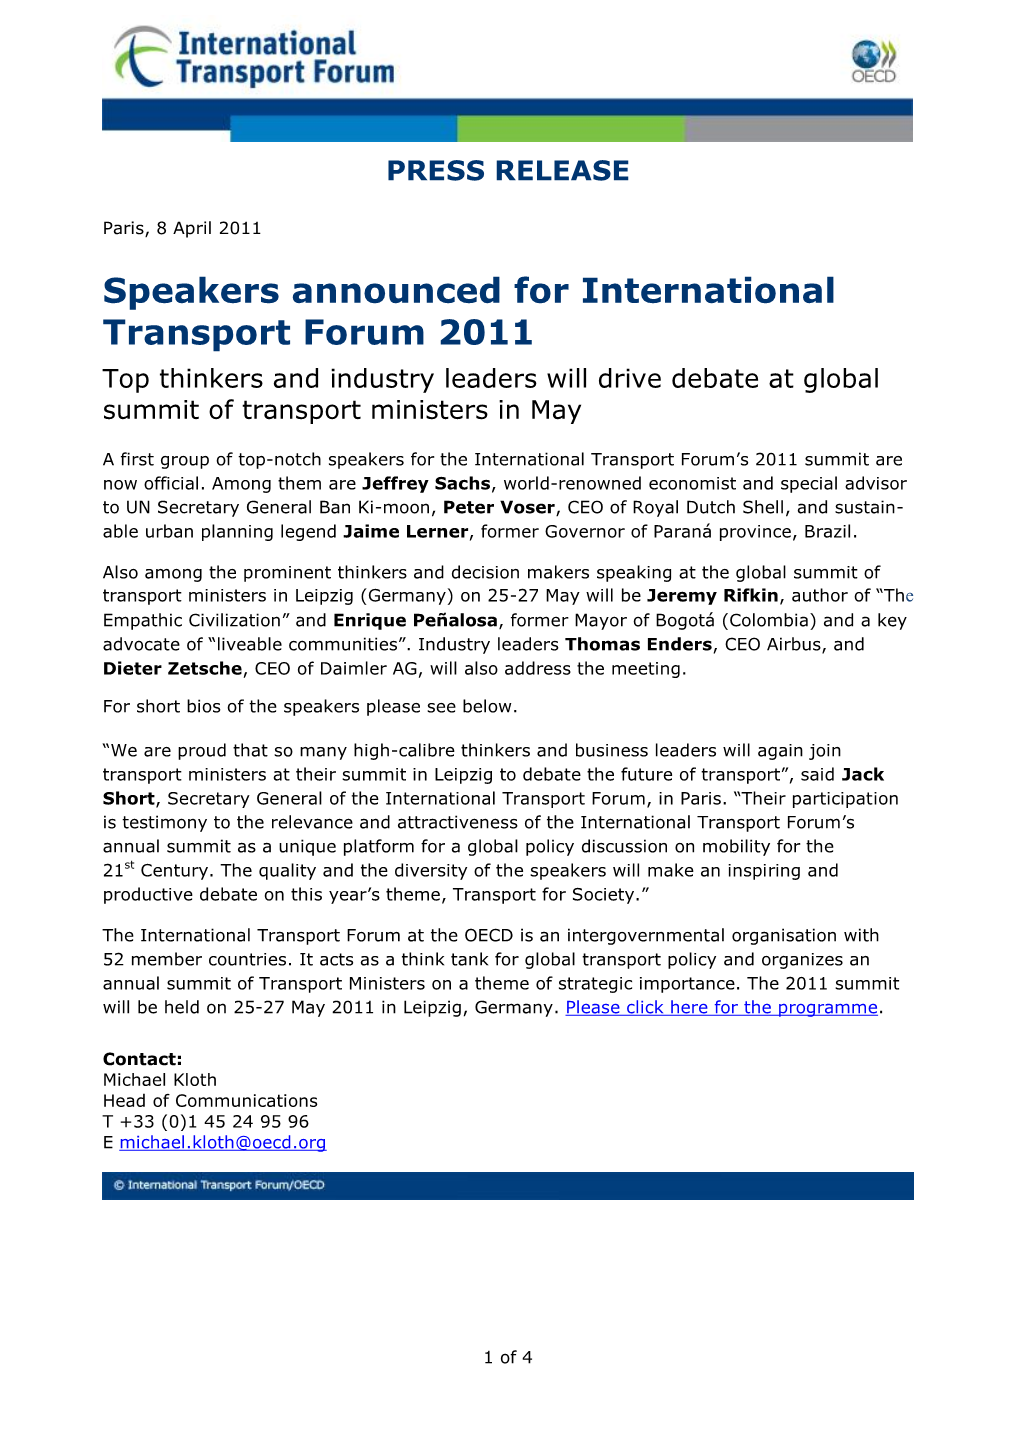 Speakers Announced for International Transport Forum 2011 Top Thinkers and Industry Leaders Will Drive Debate at Global Summit of Transport Ministers in May